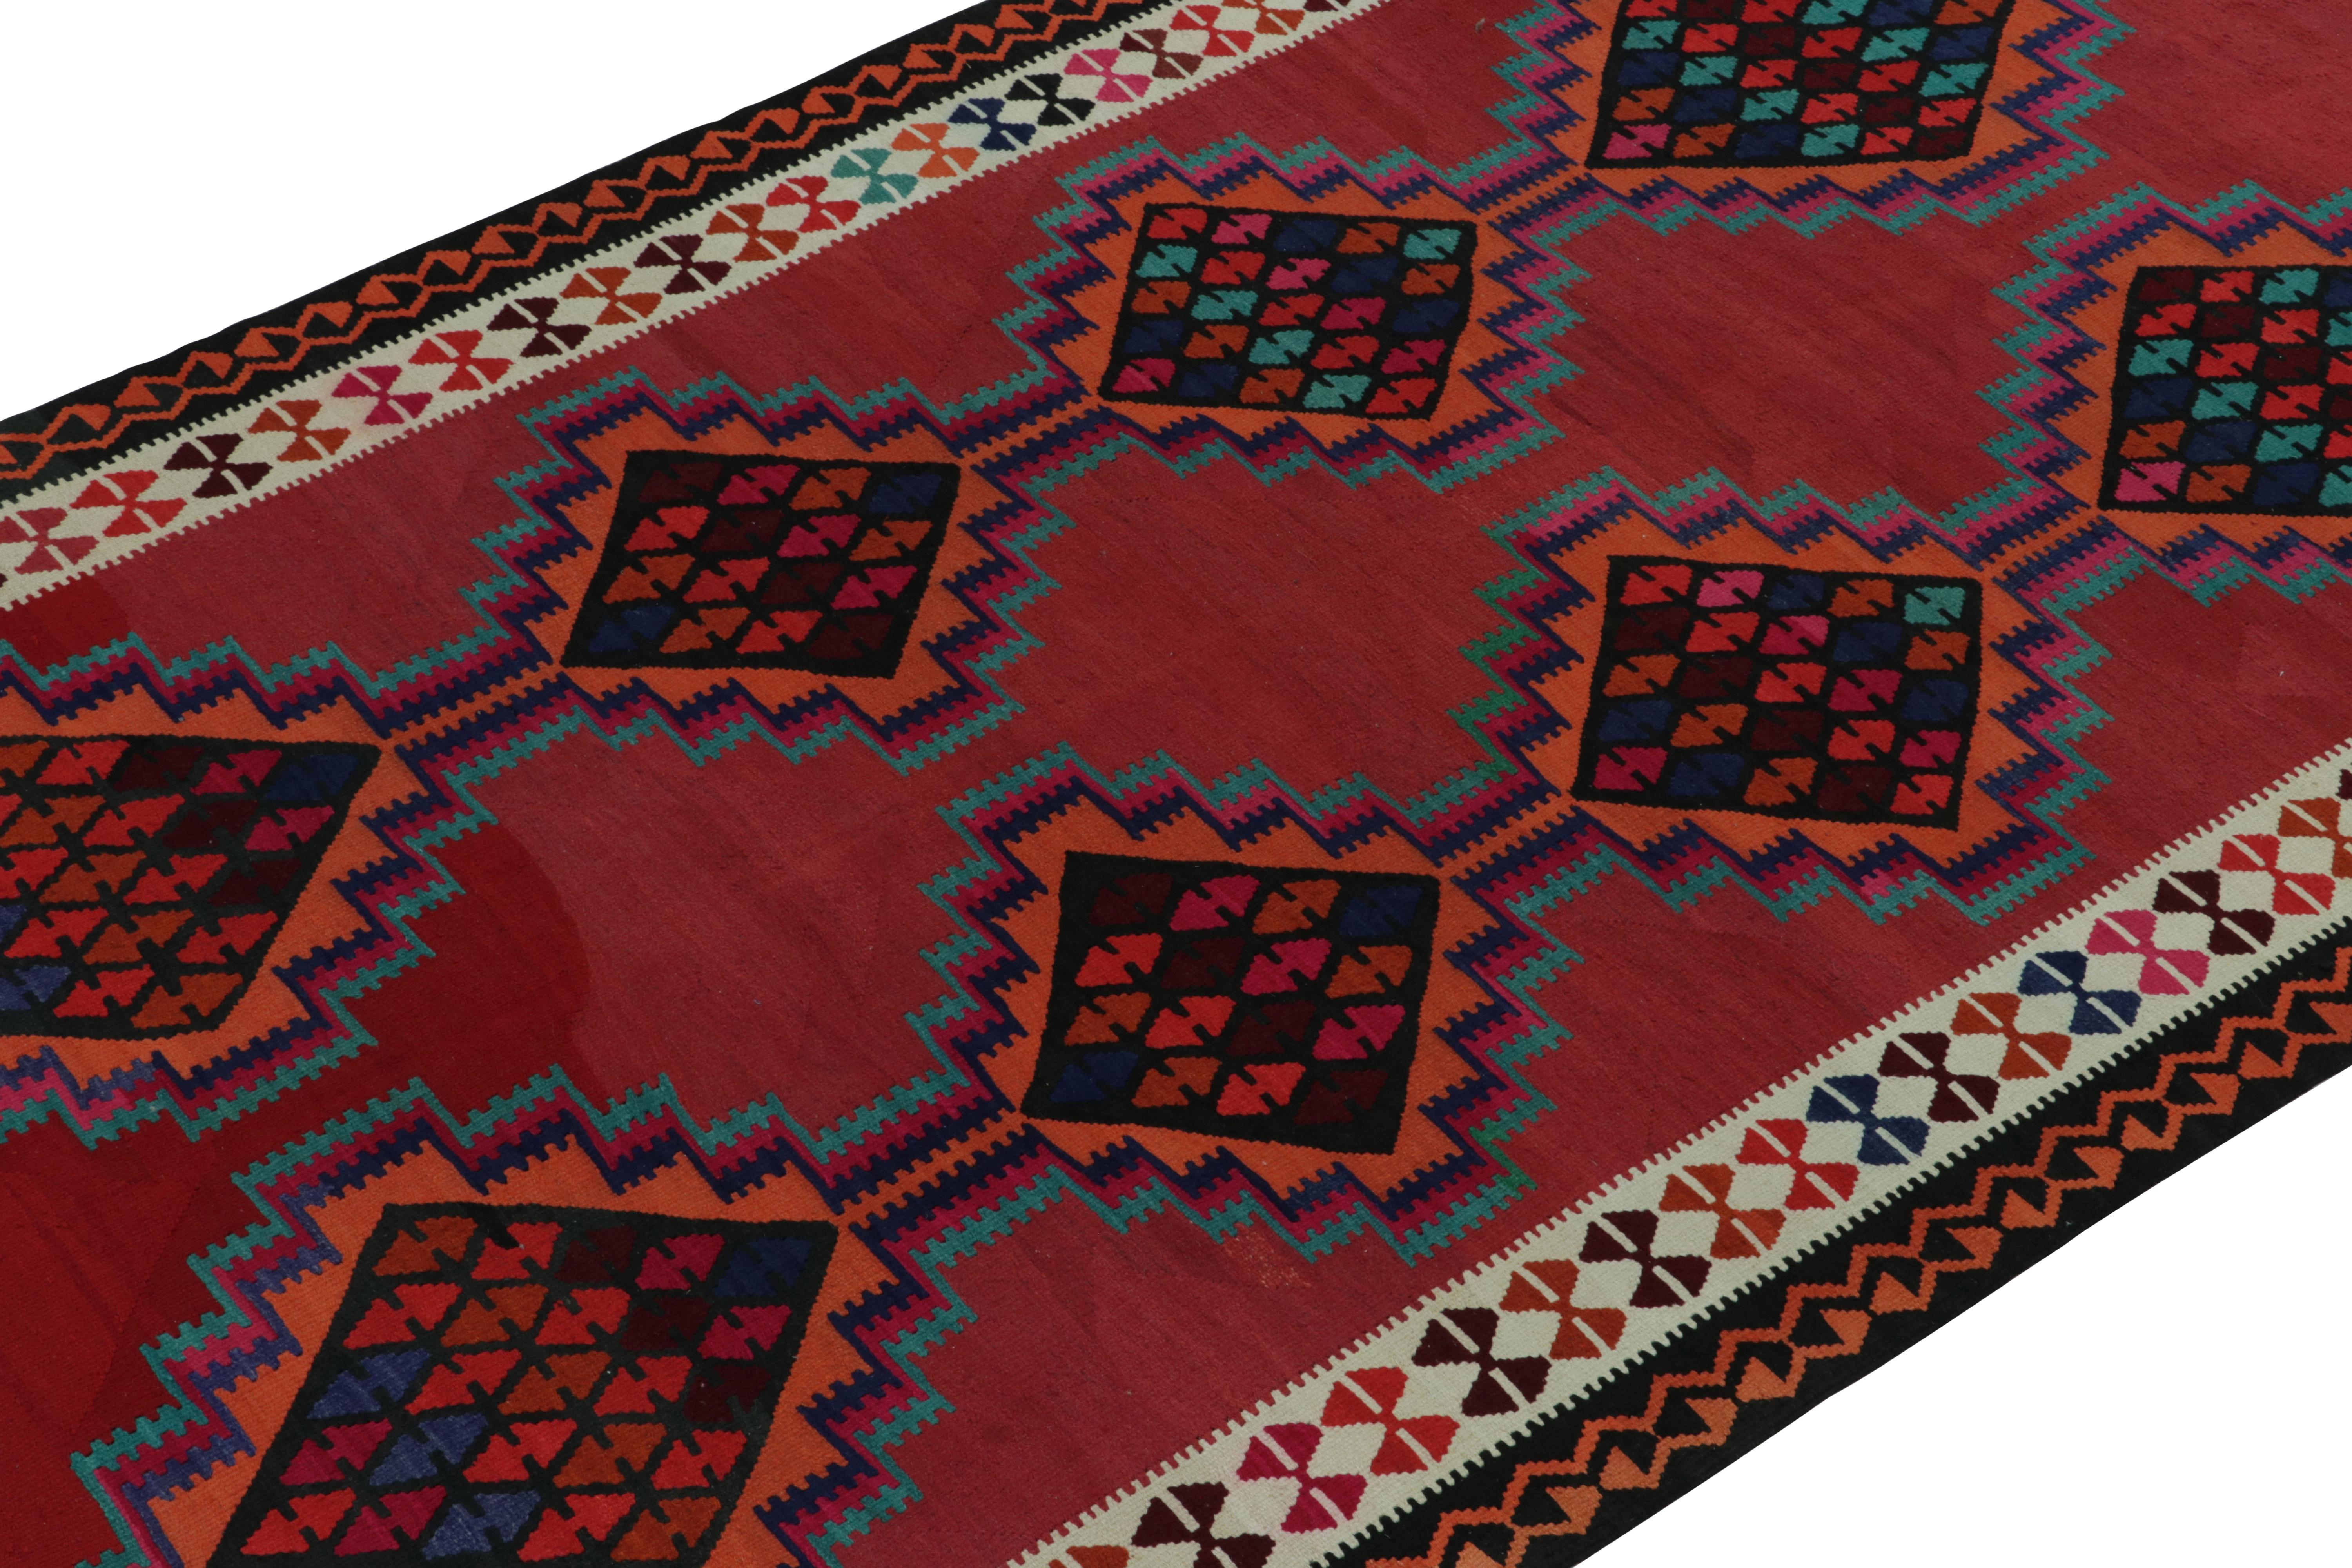 Turkish 1950s Vintage Kilim Rug in Red with Colorful Geometric Patterns by Rug & Kilim For Sale